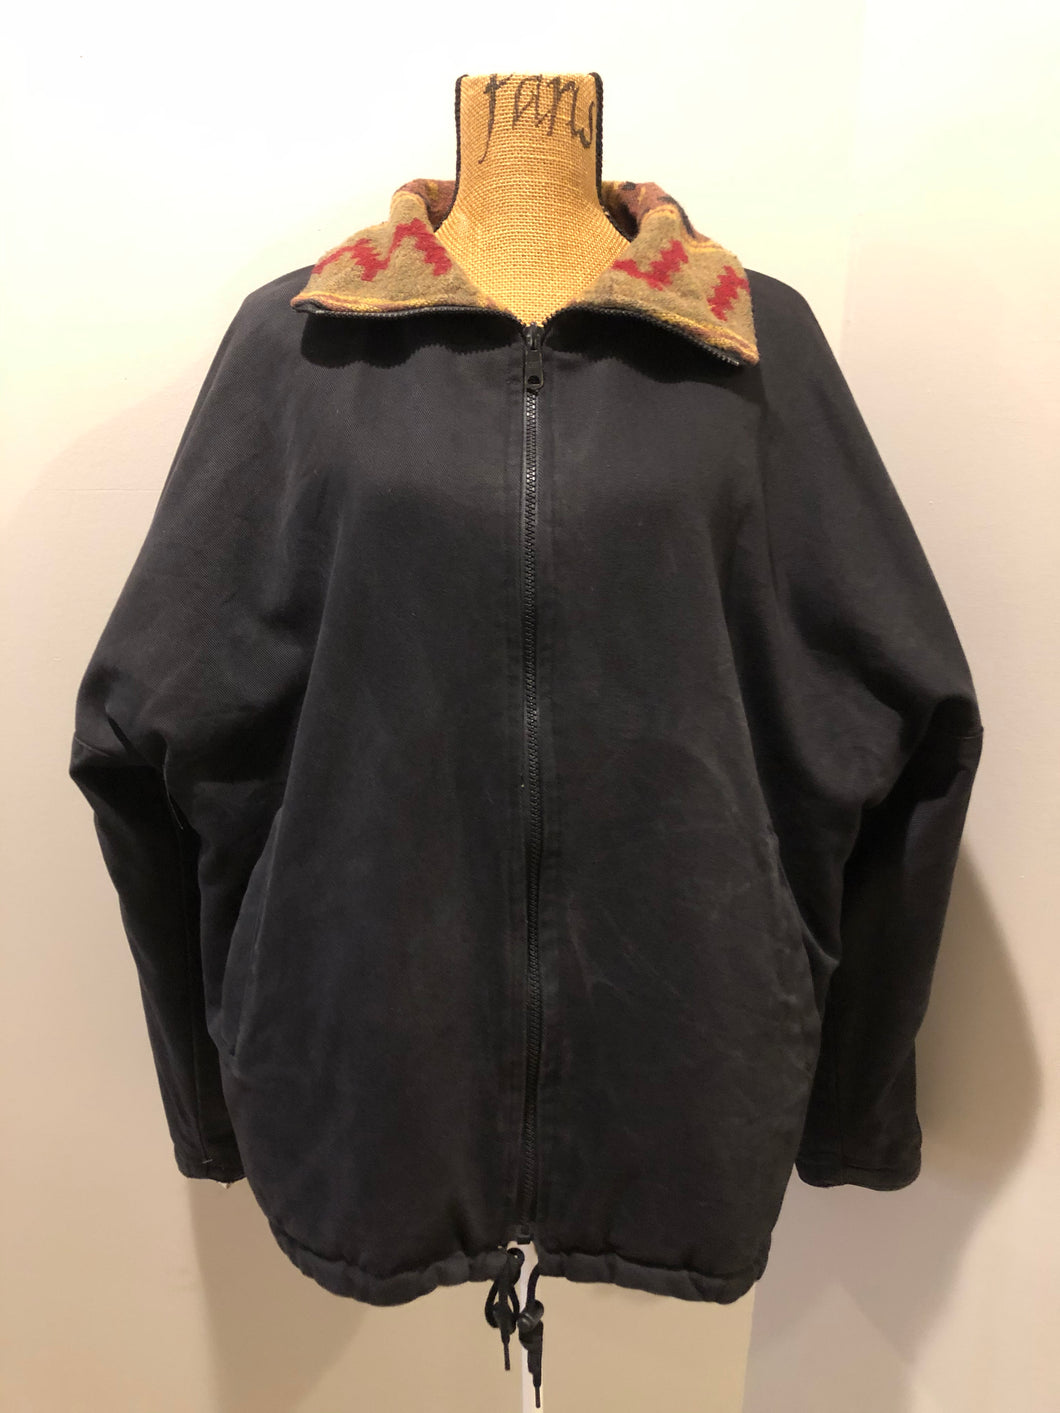 Kingspier Vintage - Reversible jacket with one side black denim and one side colourful green, red, purple ,yellow and black design, front zipper, slash pockets and a drawstring at the waist. 